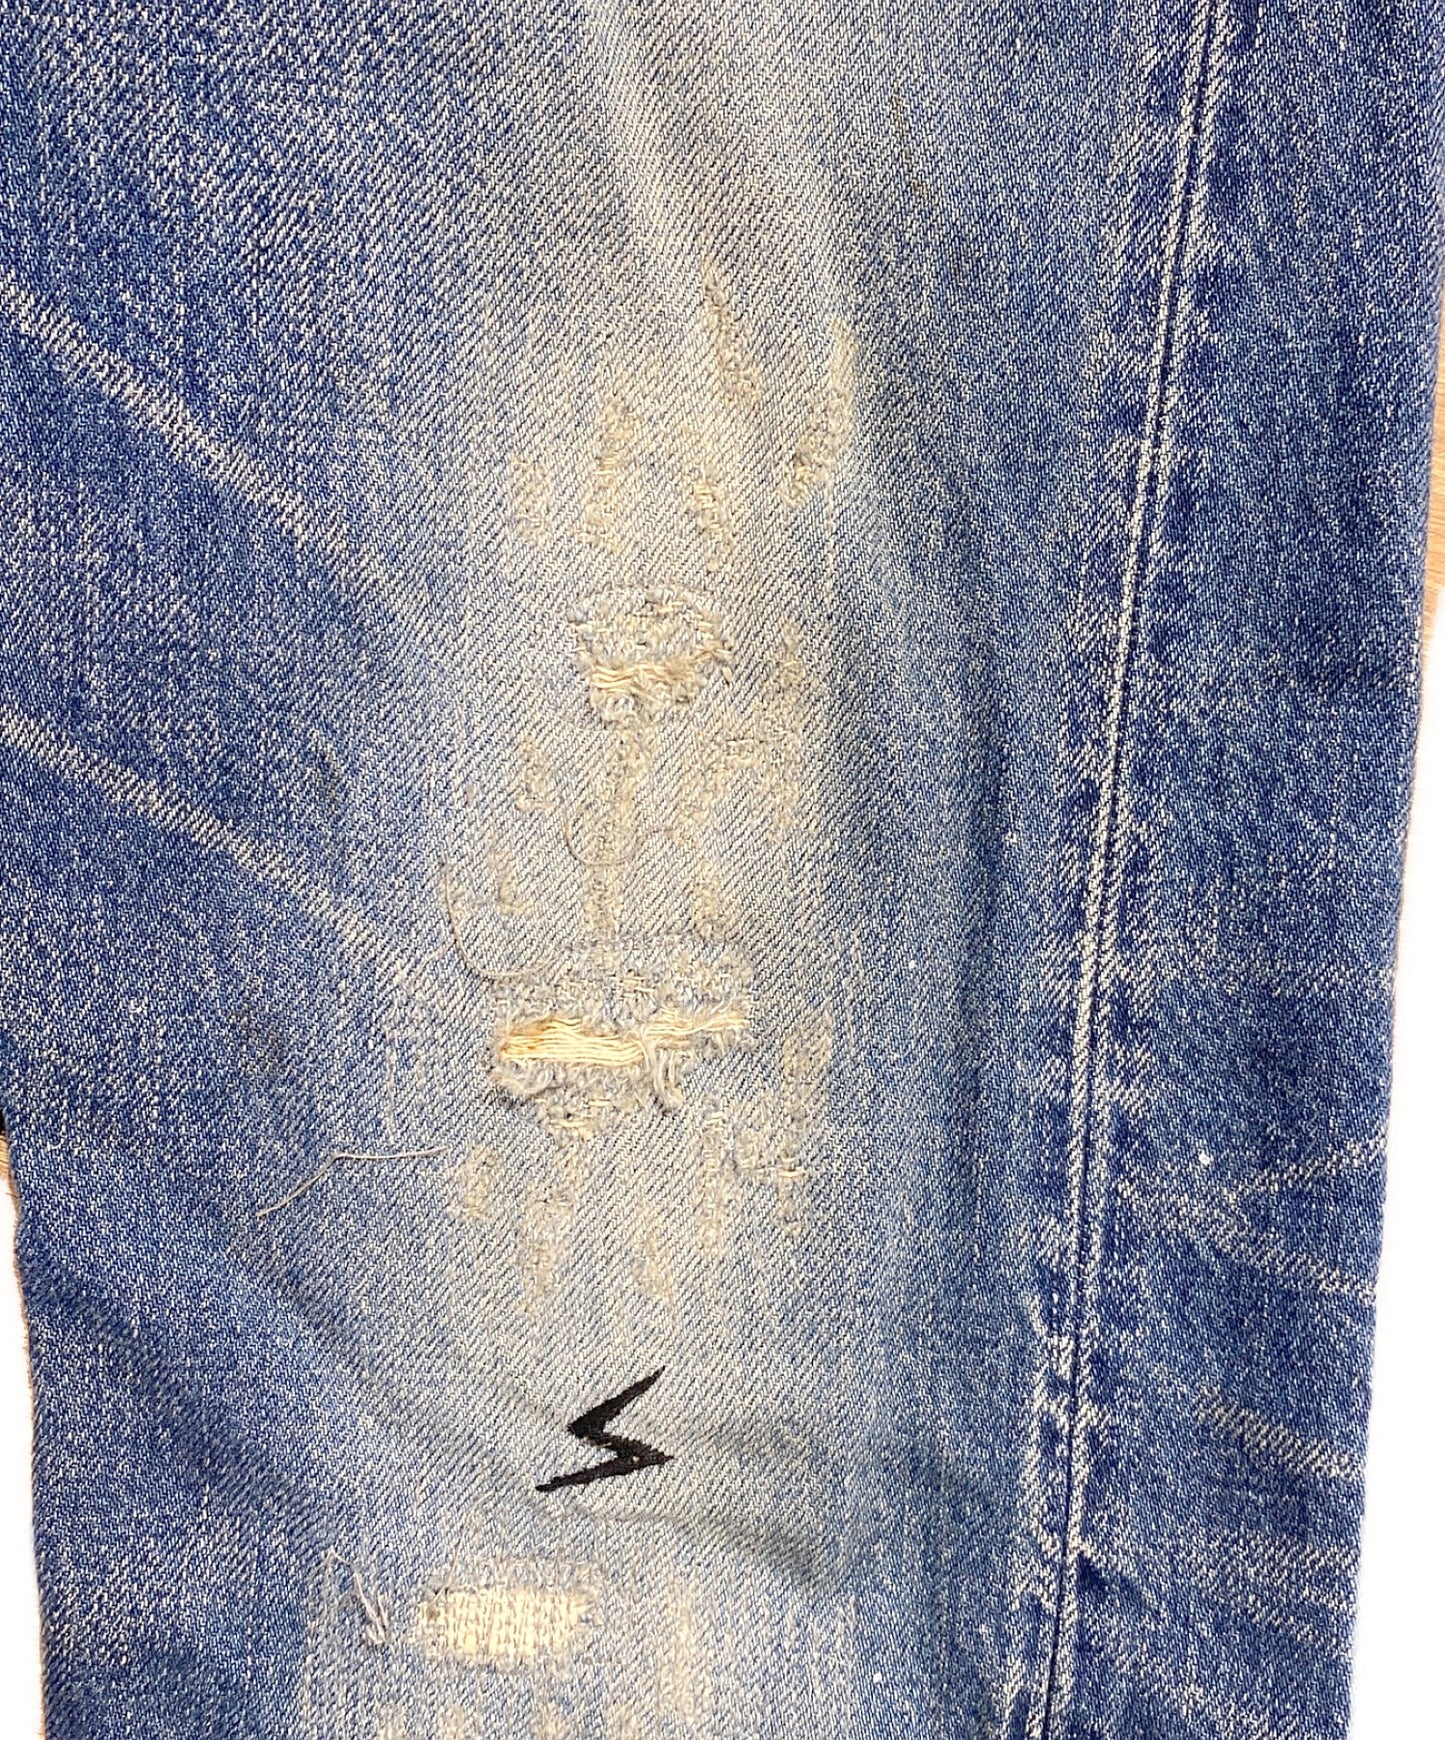 [Pre-owned] UNDERCOVER Patti Smith lyrics embroidery repaired denim pants C4521